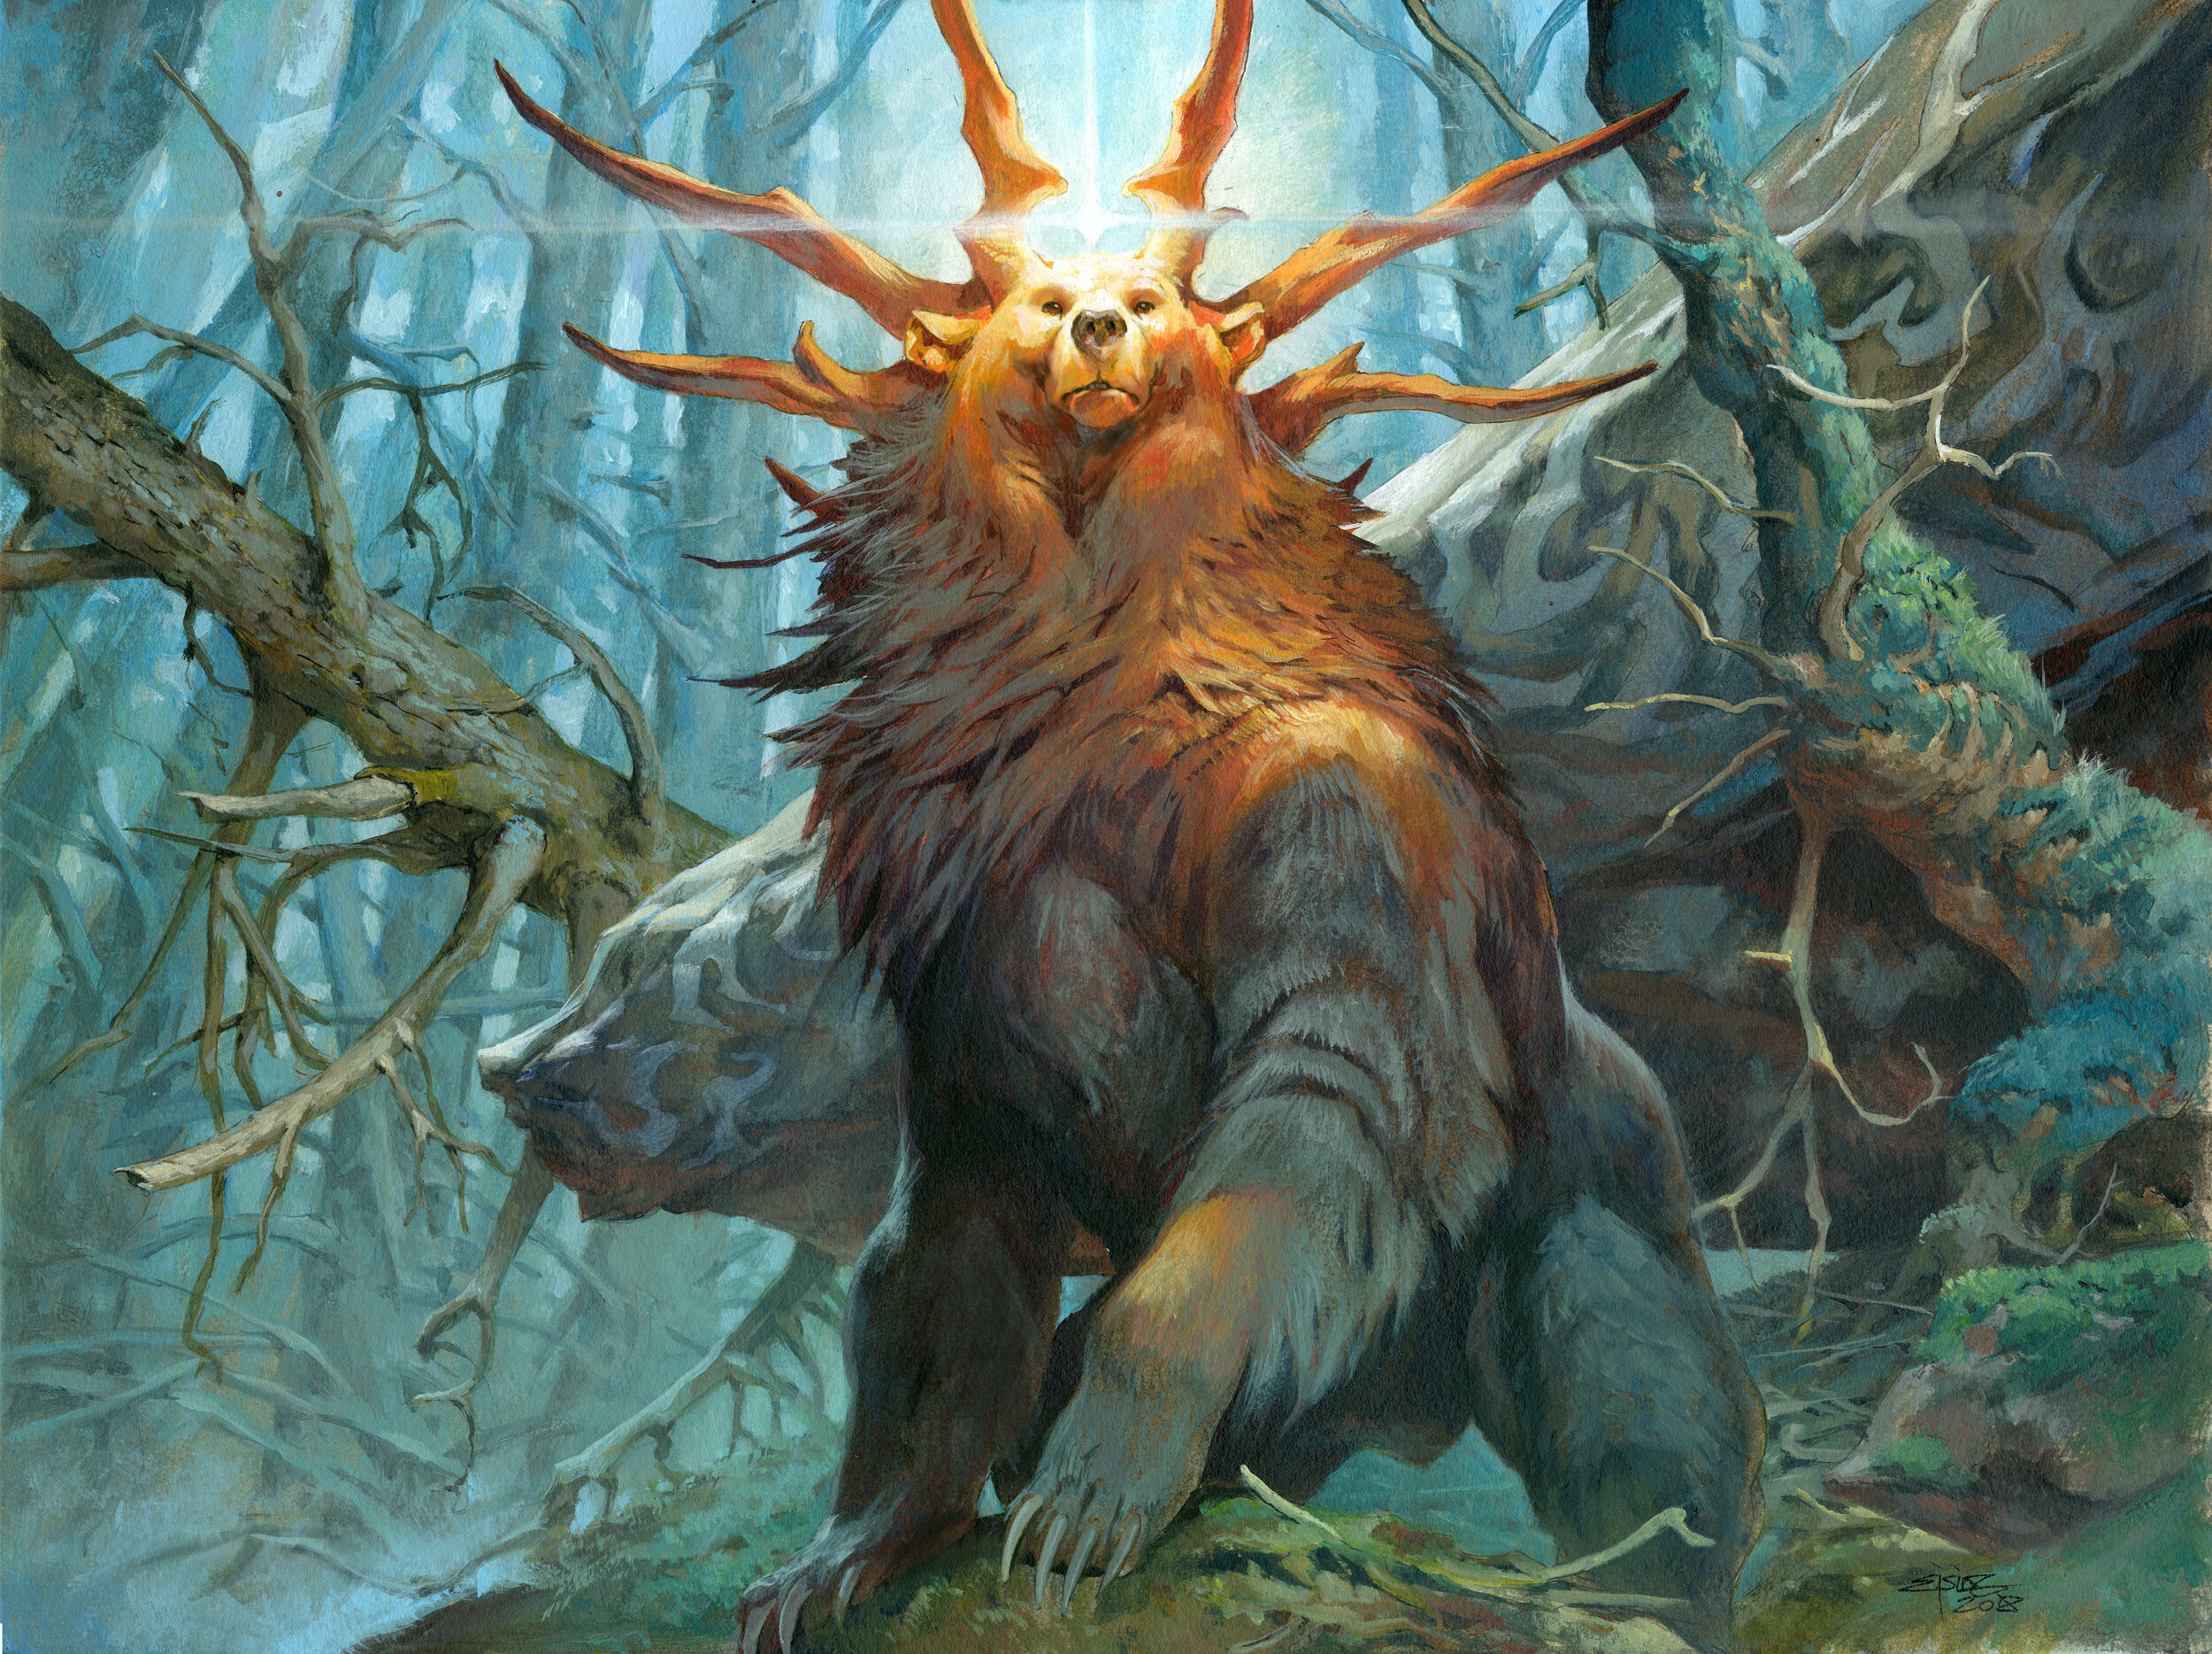 2. Tooth and Nail - Magic: The Gathering Artwork - wide 5